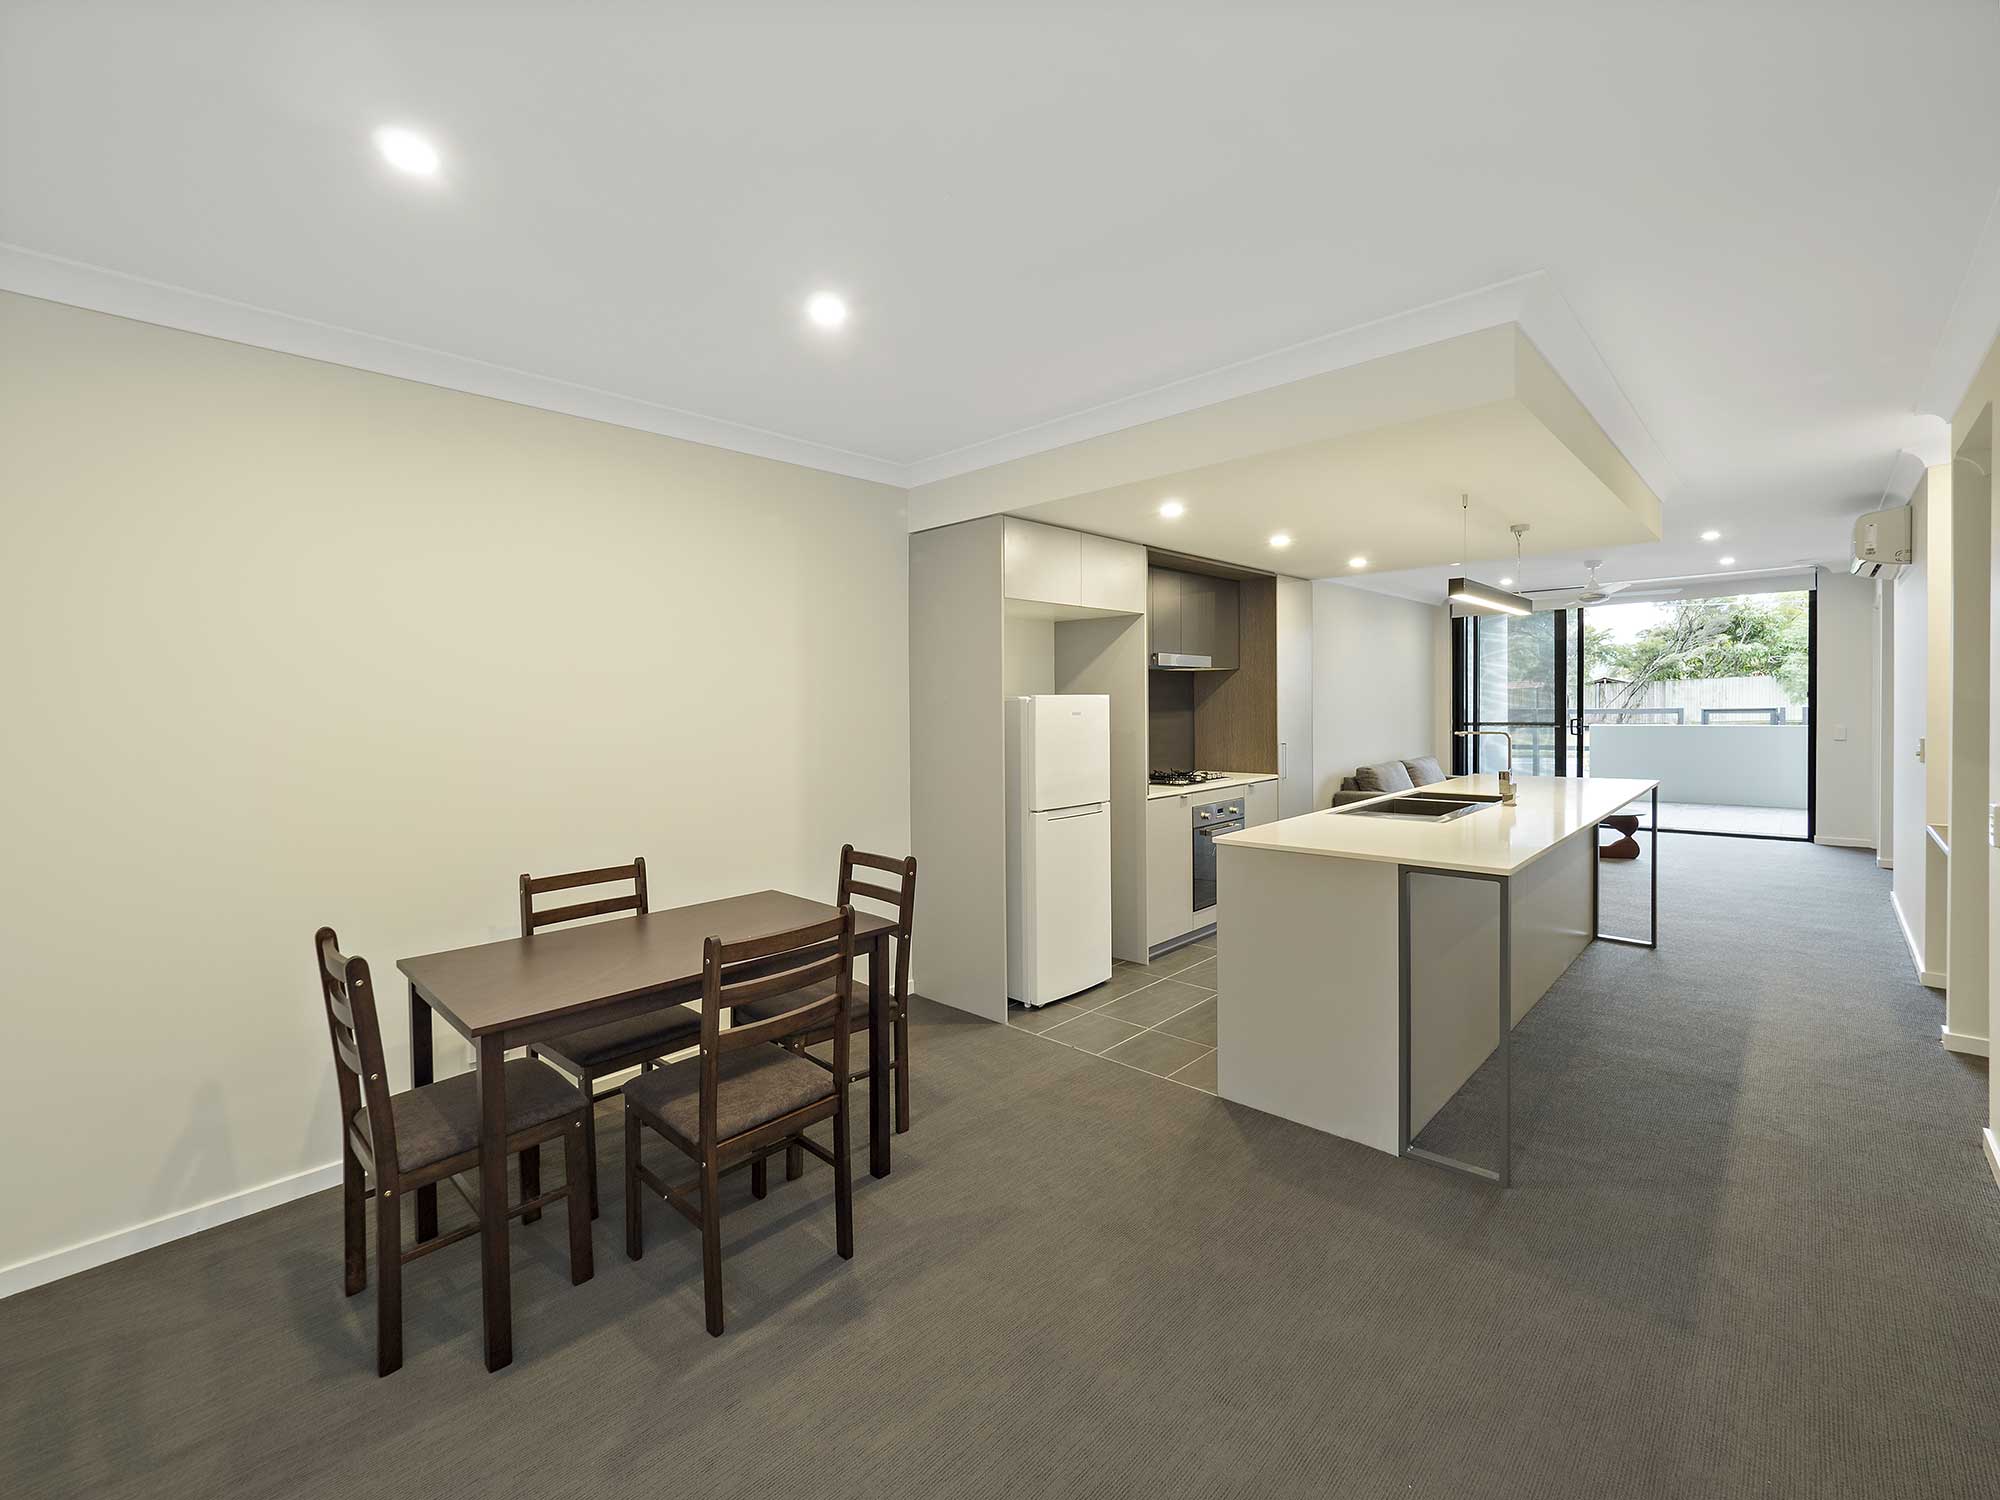 Rental apartment photography Comer St Coopers Plains